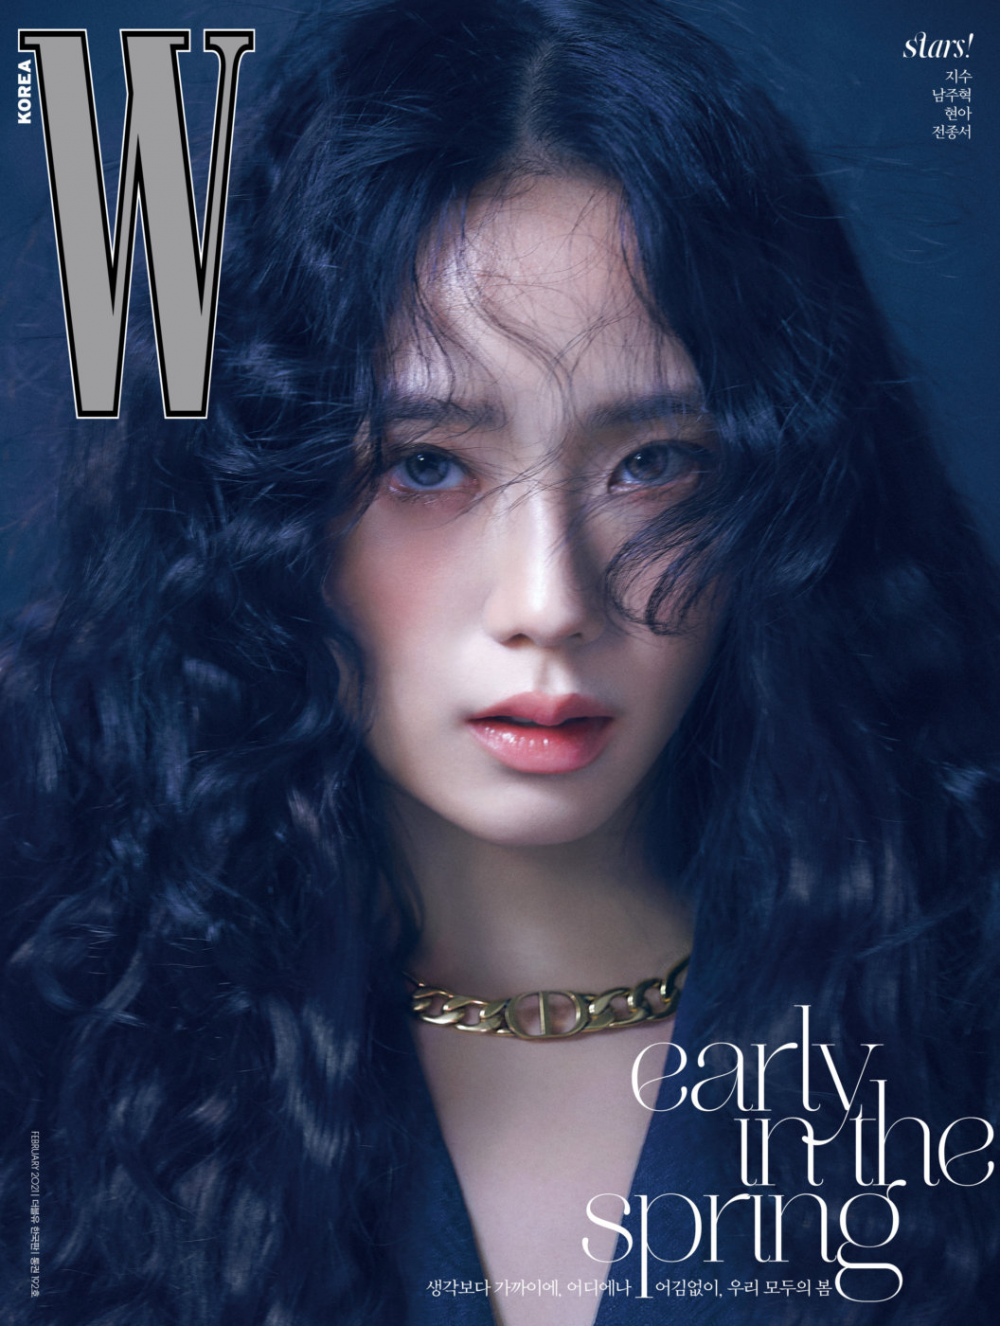 BLACKPINK's Jisoo embellishes 'W magazine' with her exquisite beauty